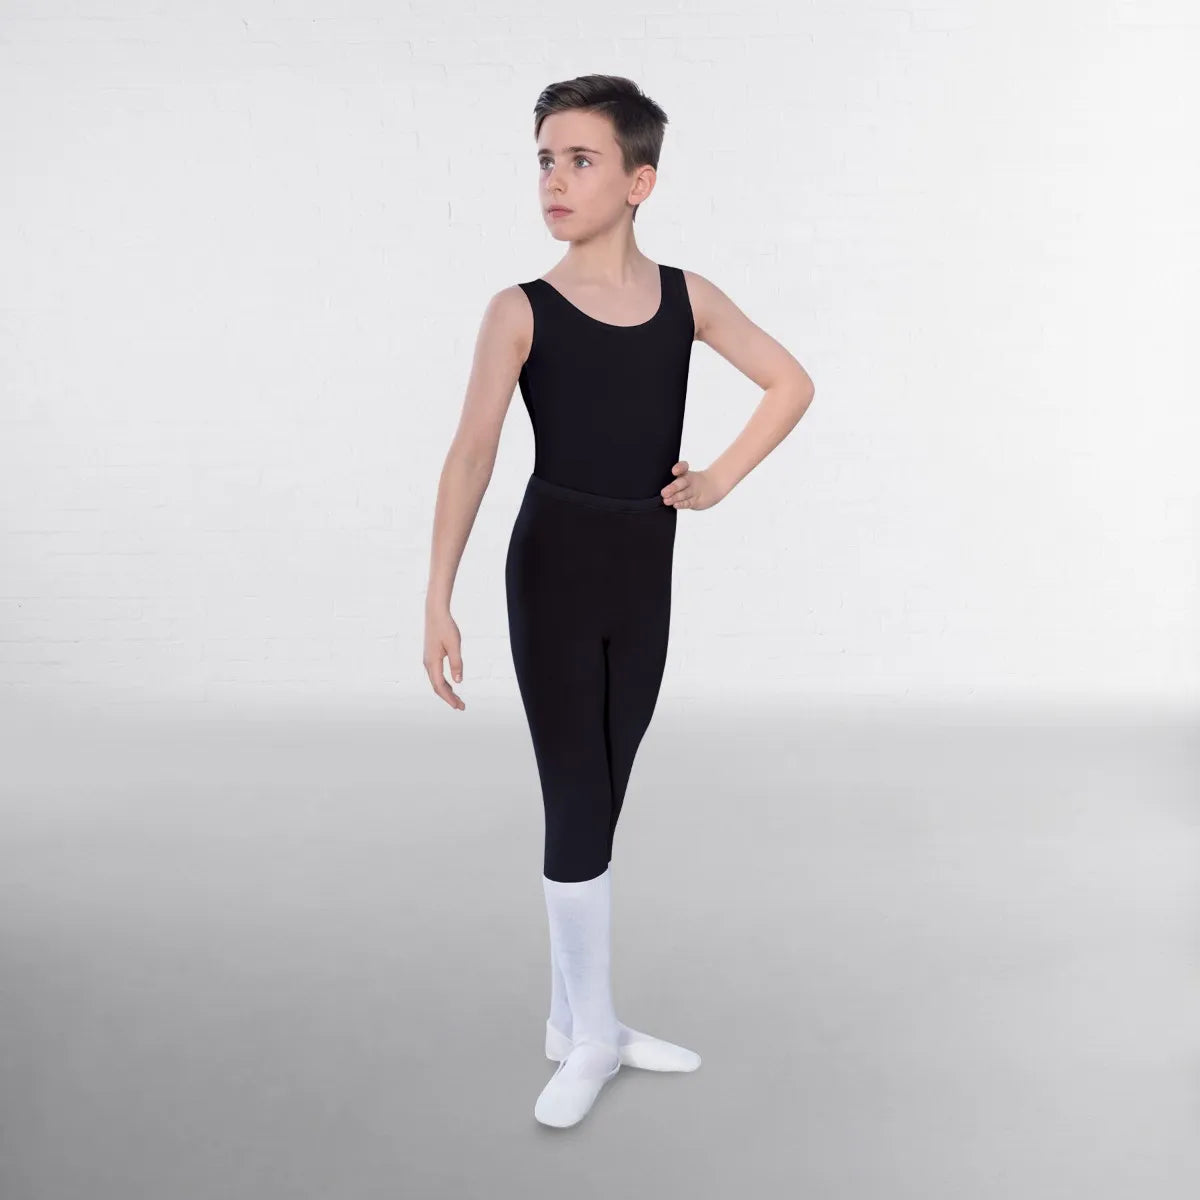 Pin by Pinner on Dance outfits | Leotards, Dance leggings, Dance garments